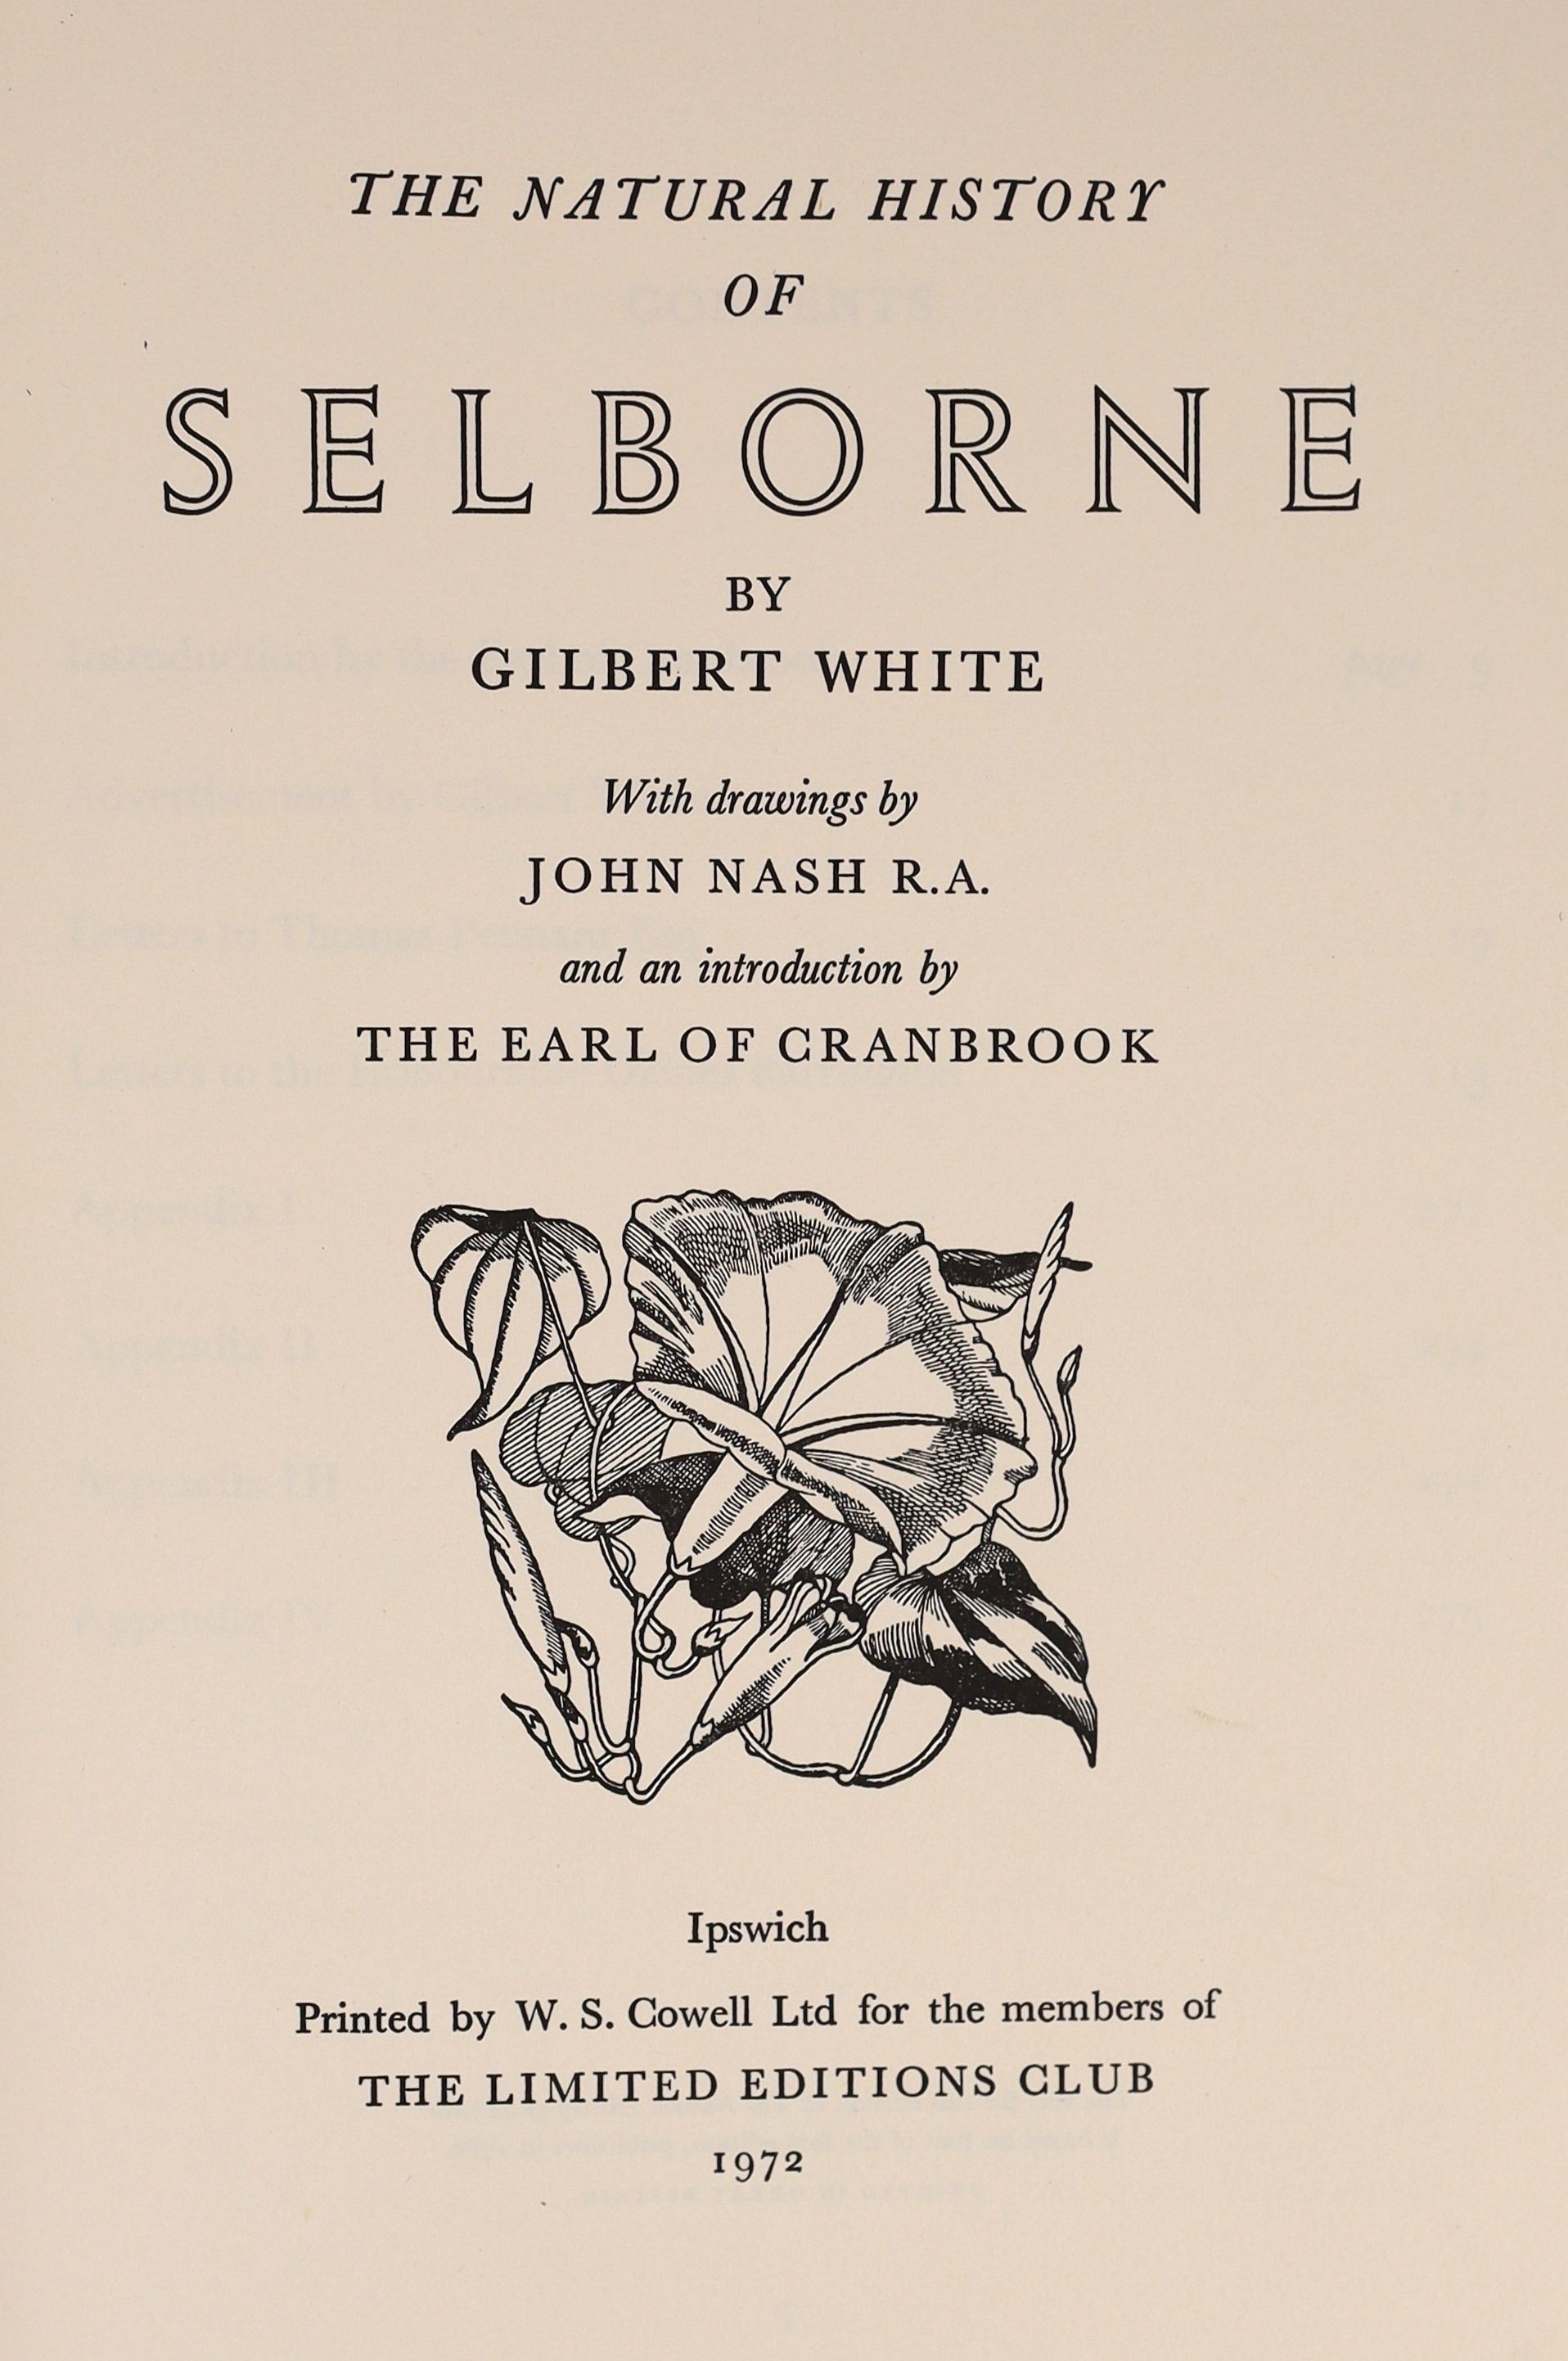 White, Gilbert - The Natural History of Selborne, one of 1500, signed and illustrated with 16 colour plates by John Nash, 4to, quarter gilt stamped calf, Limited Editions Club, Ipswich, 1972, with slip case.